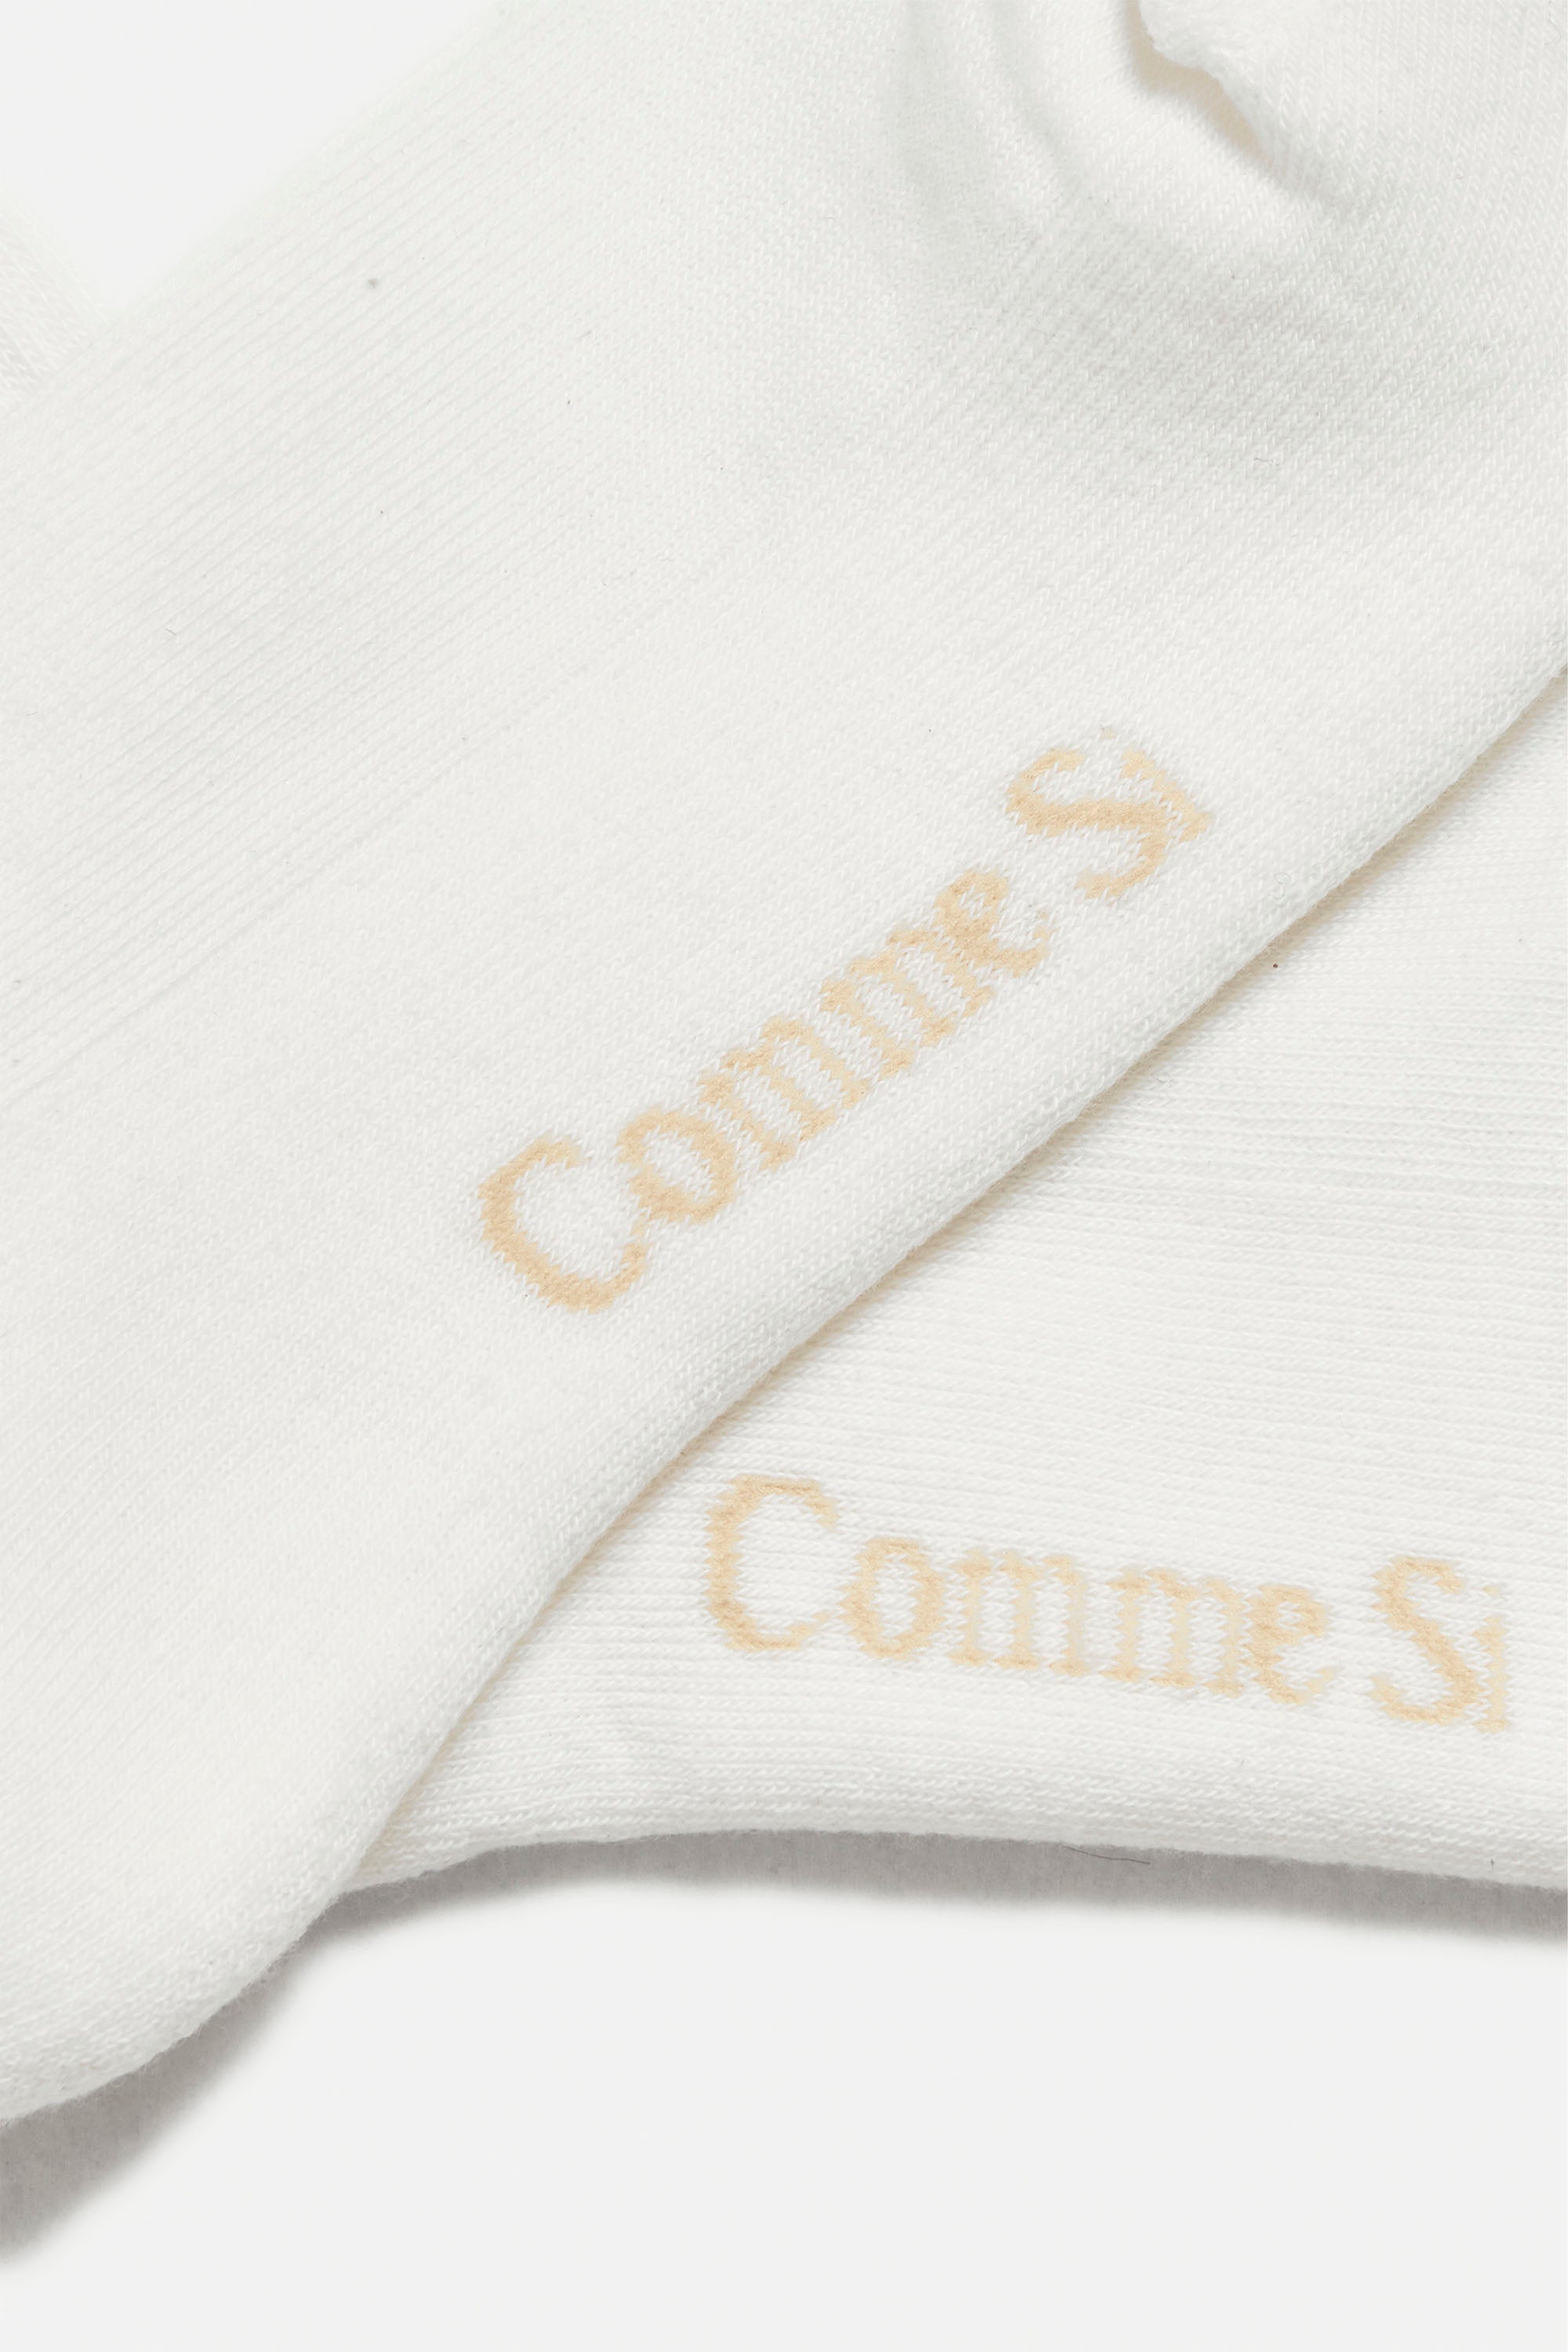 Footbed detail, Ribbon tag cuff detail of The Tube Sock, White, GOTS certified Organic Cotton, by Comme Si